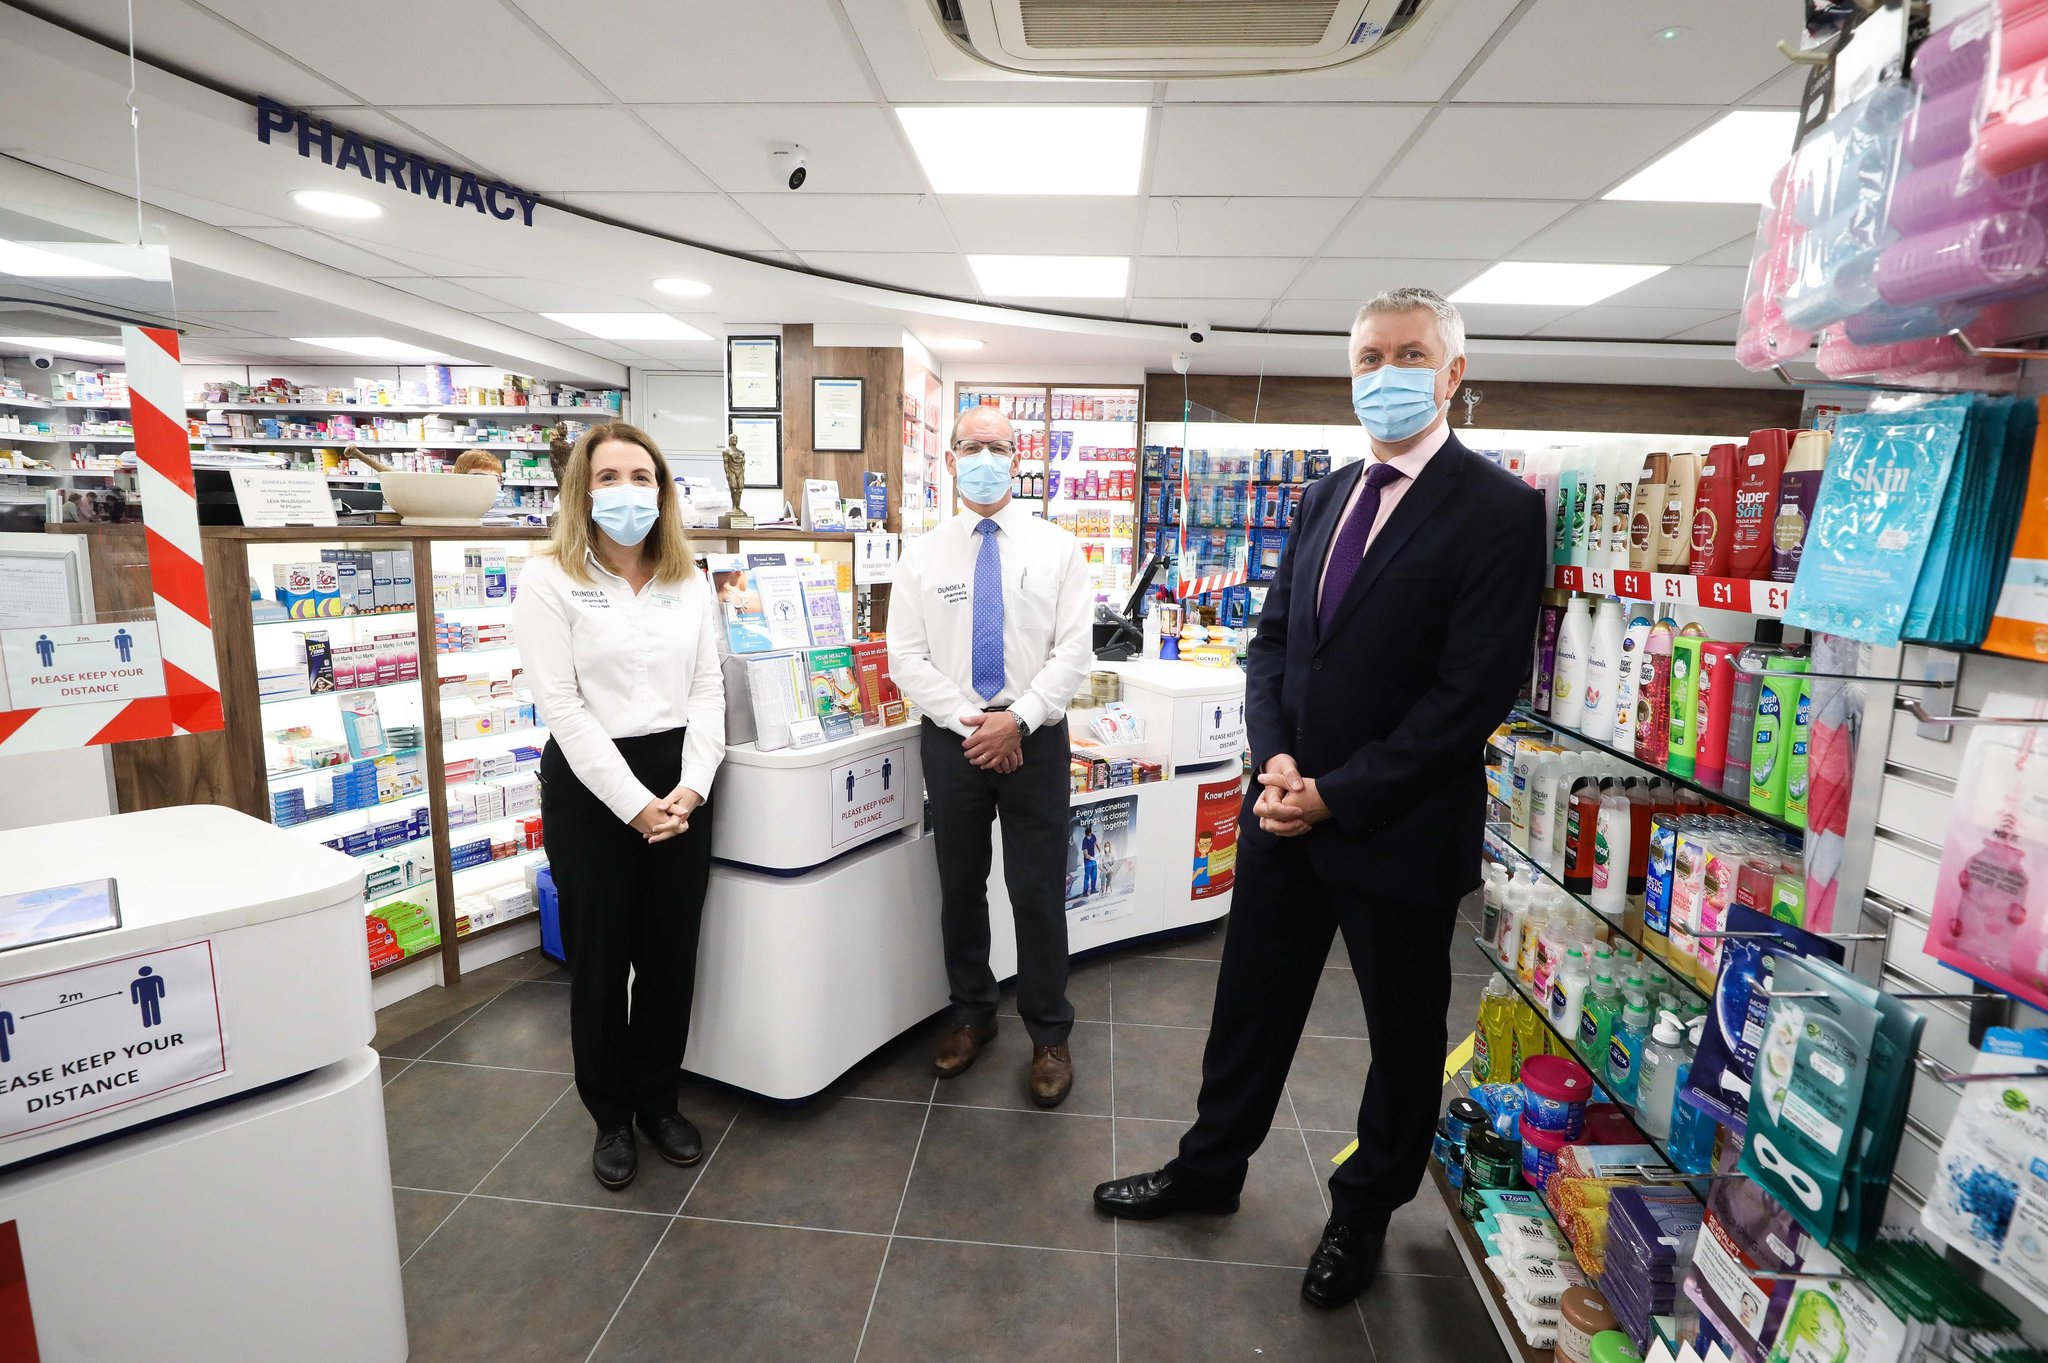 Covid-19: Northern Ireland pharmacies have supplied over one million lateral flow test kits